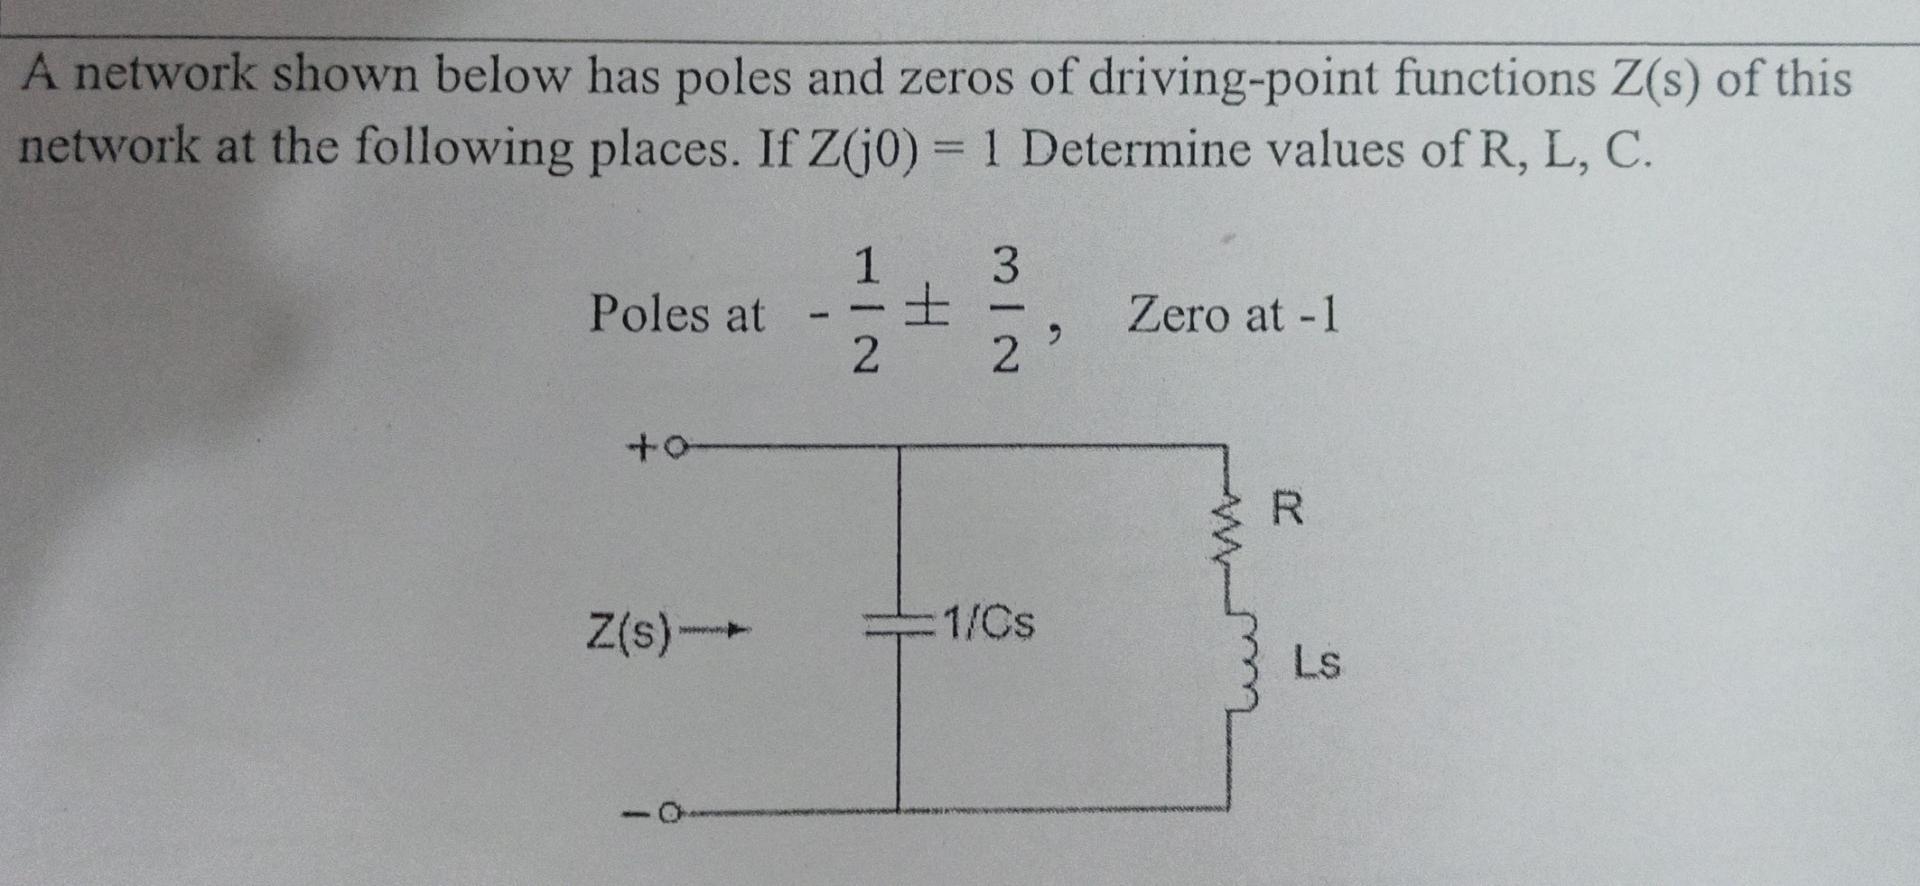 A network shown below has poles and zeros of driving-point functions Z(s) of this network at the following